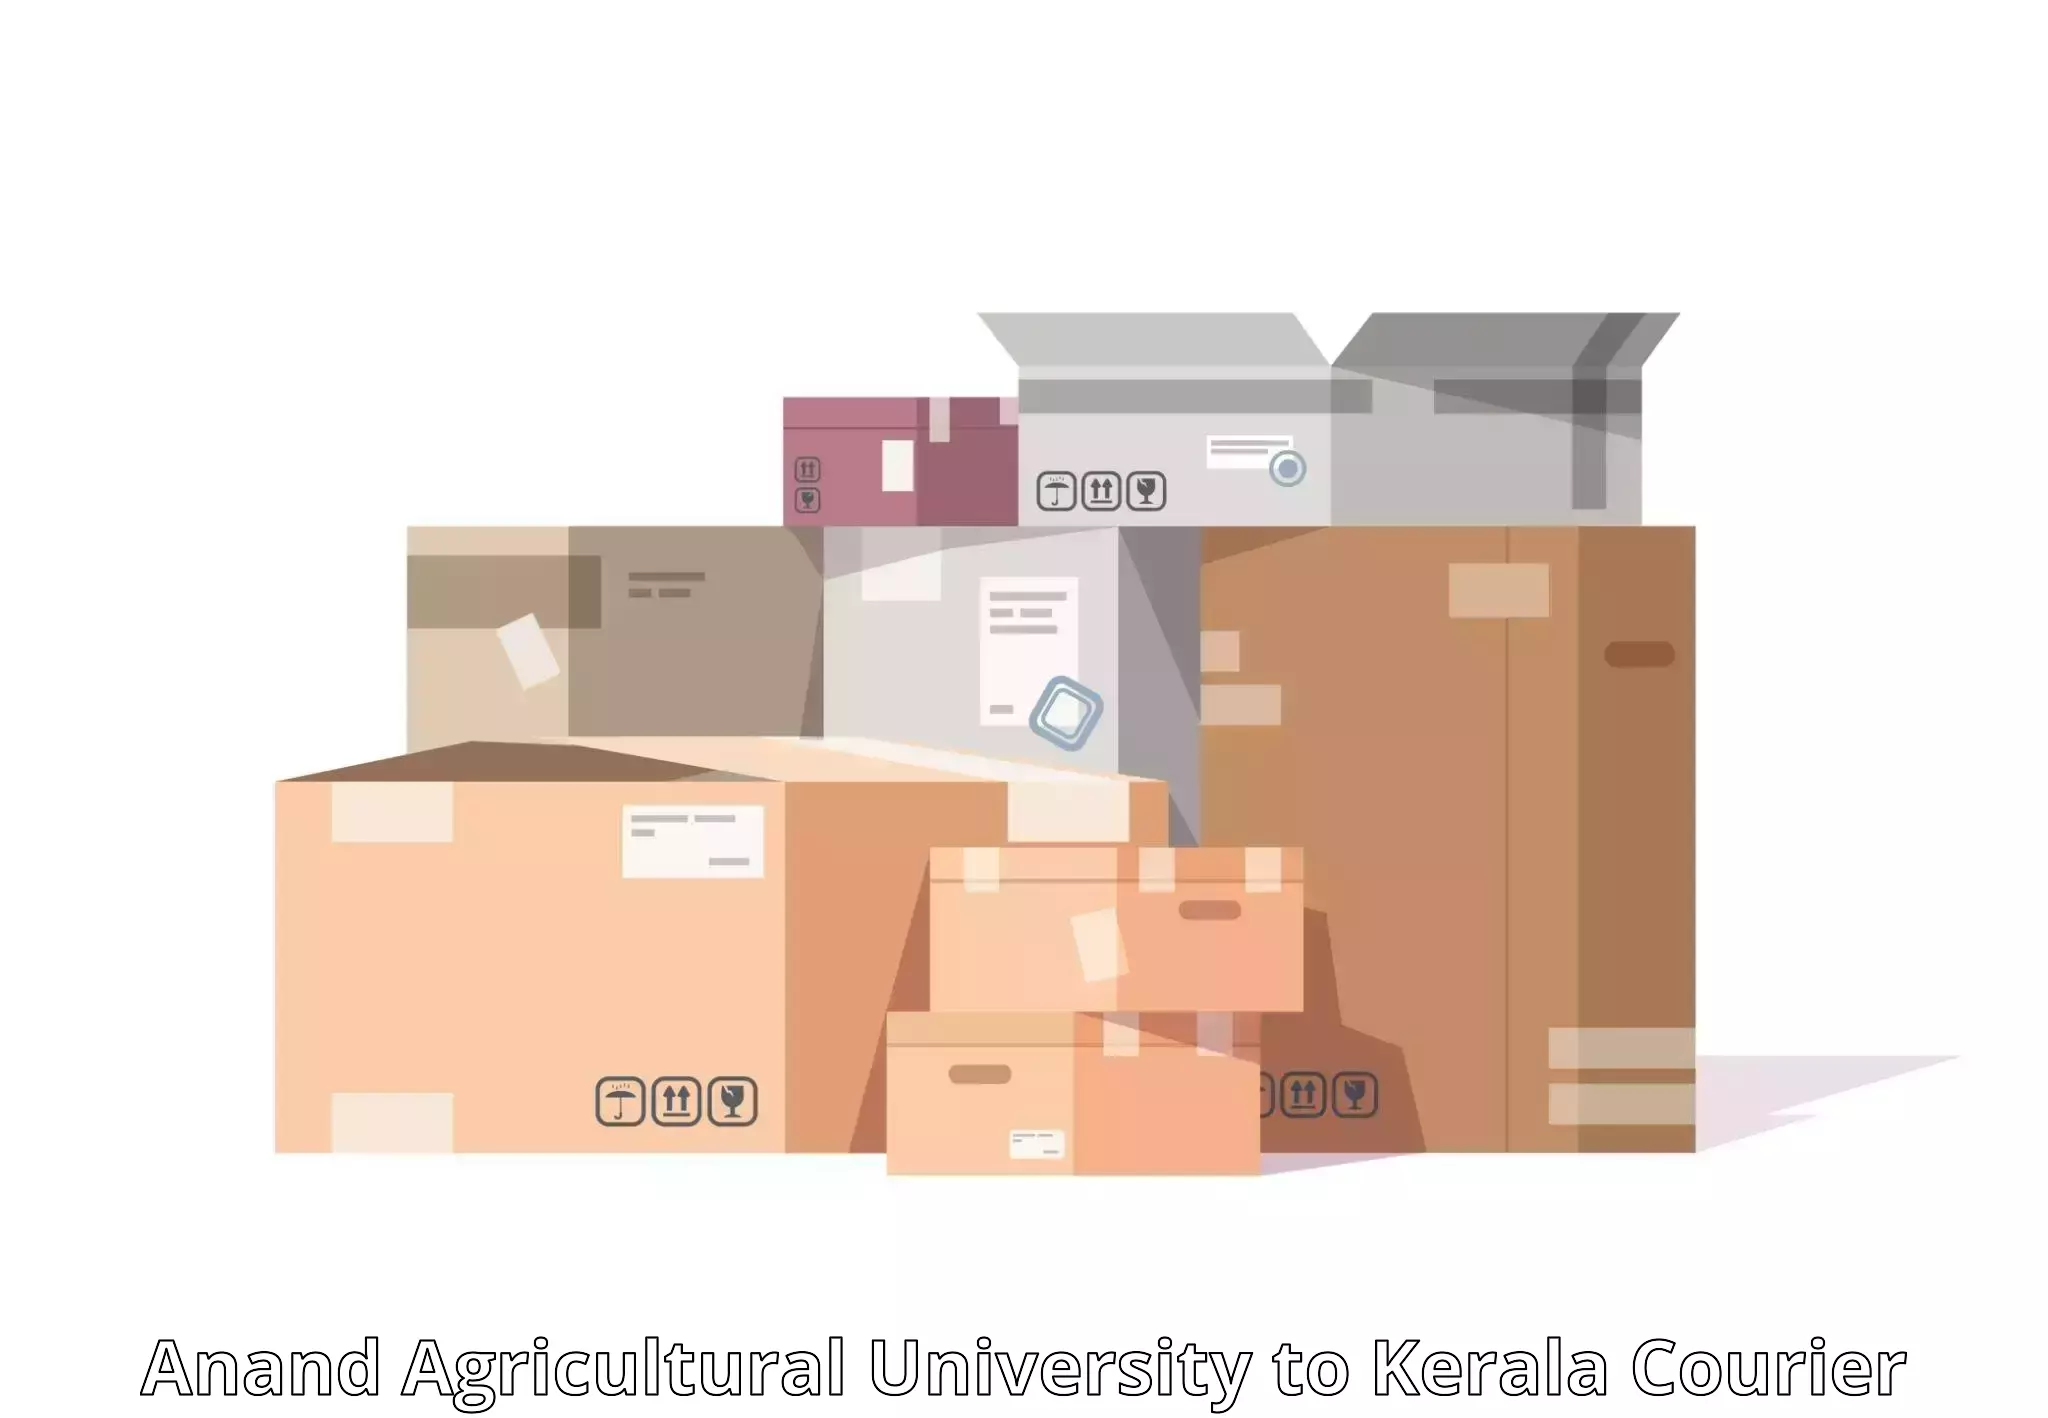 Personal parcel delivery Anand Agricultural University to Tiruvalla